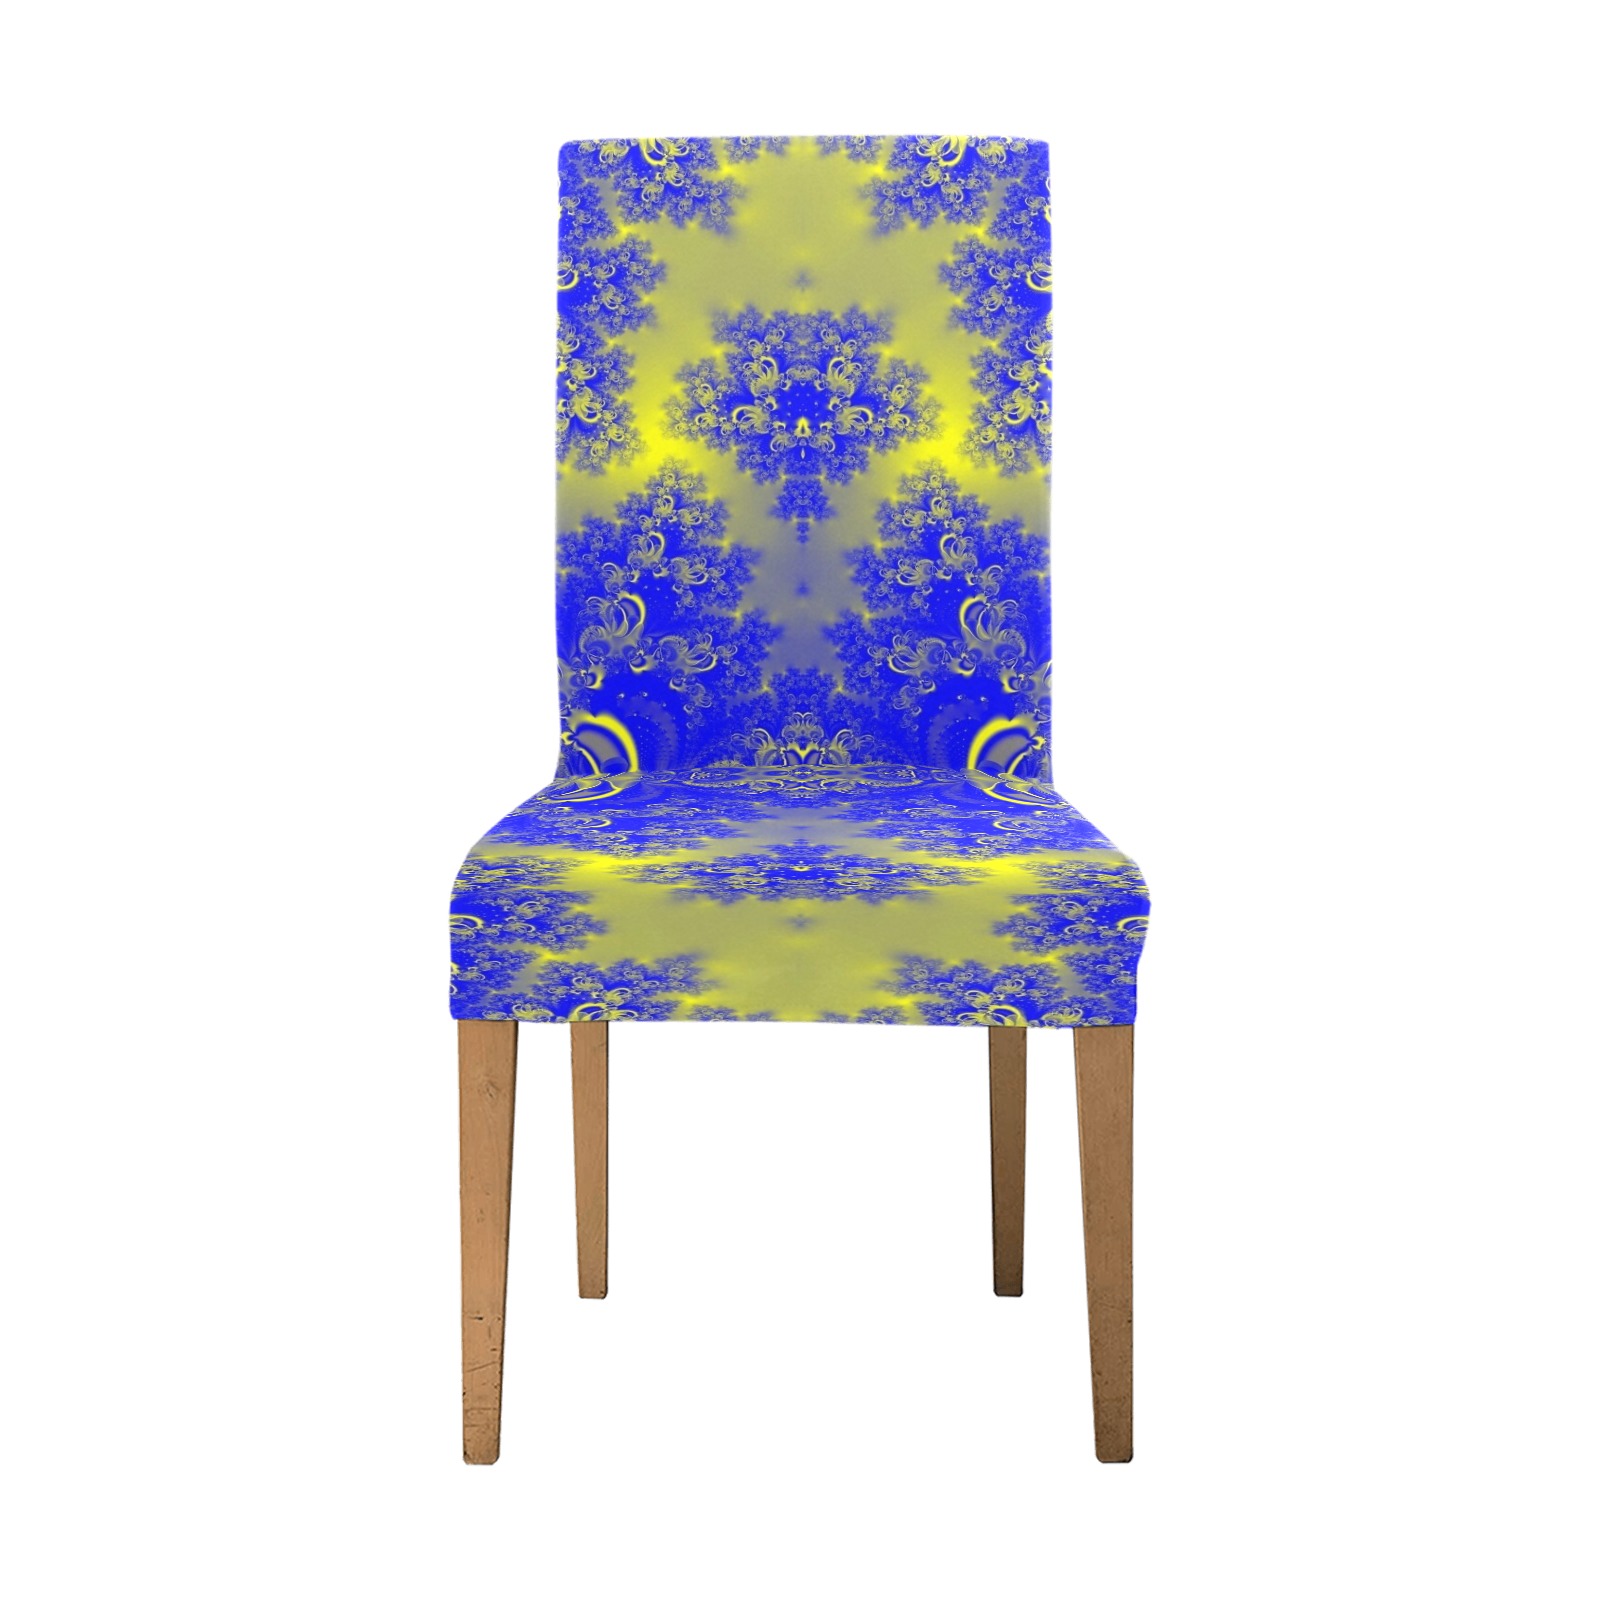 Sunlight and Blueberry Plants Frost Fractal Chair Cover (Pack of 4)